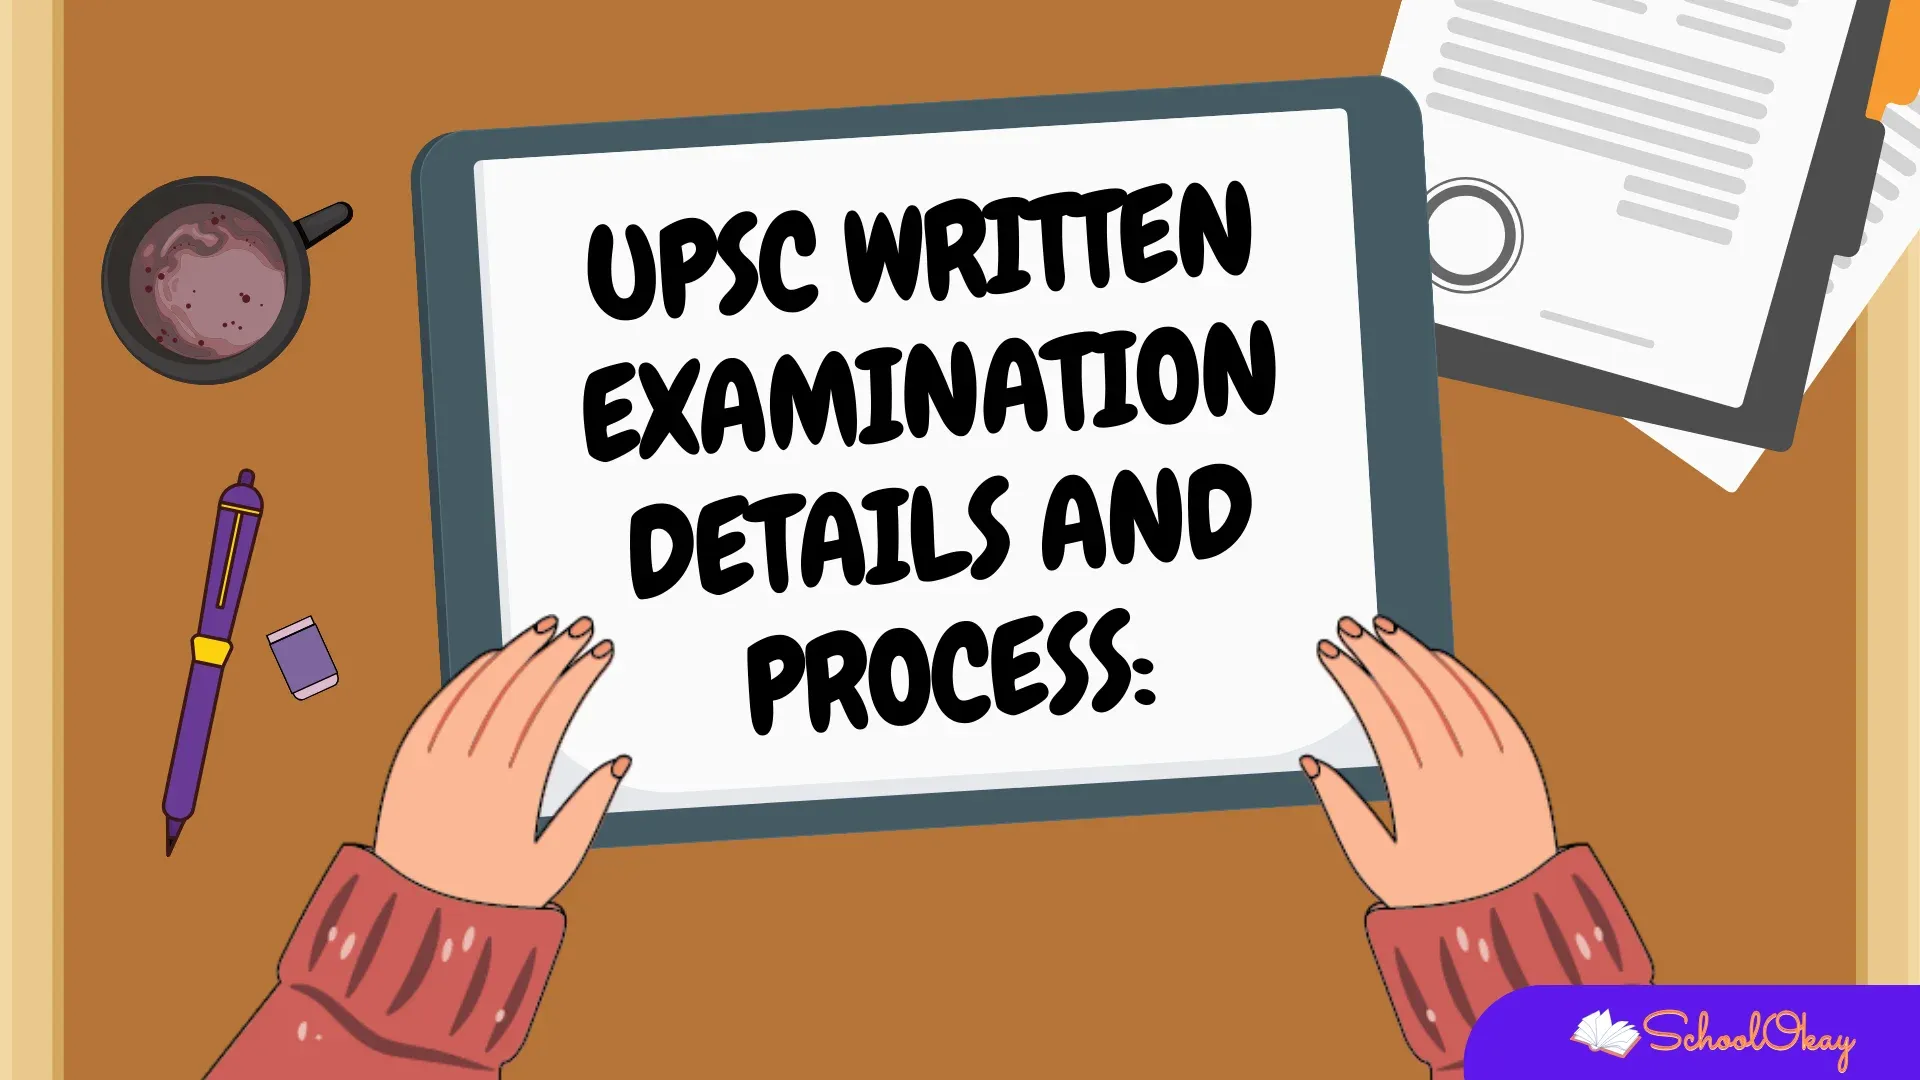 UPSC written examination details and process